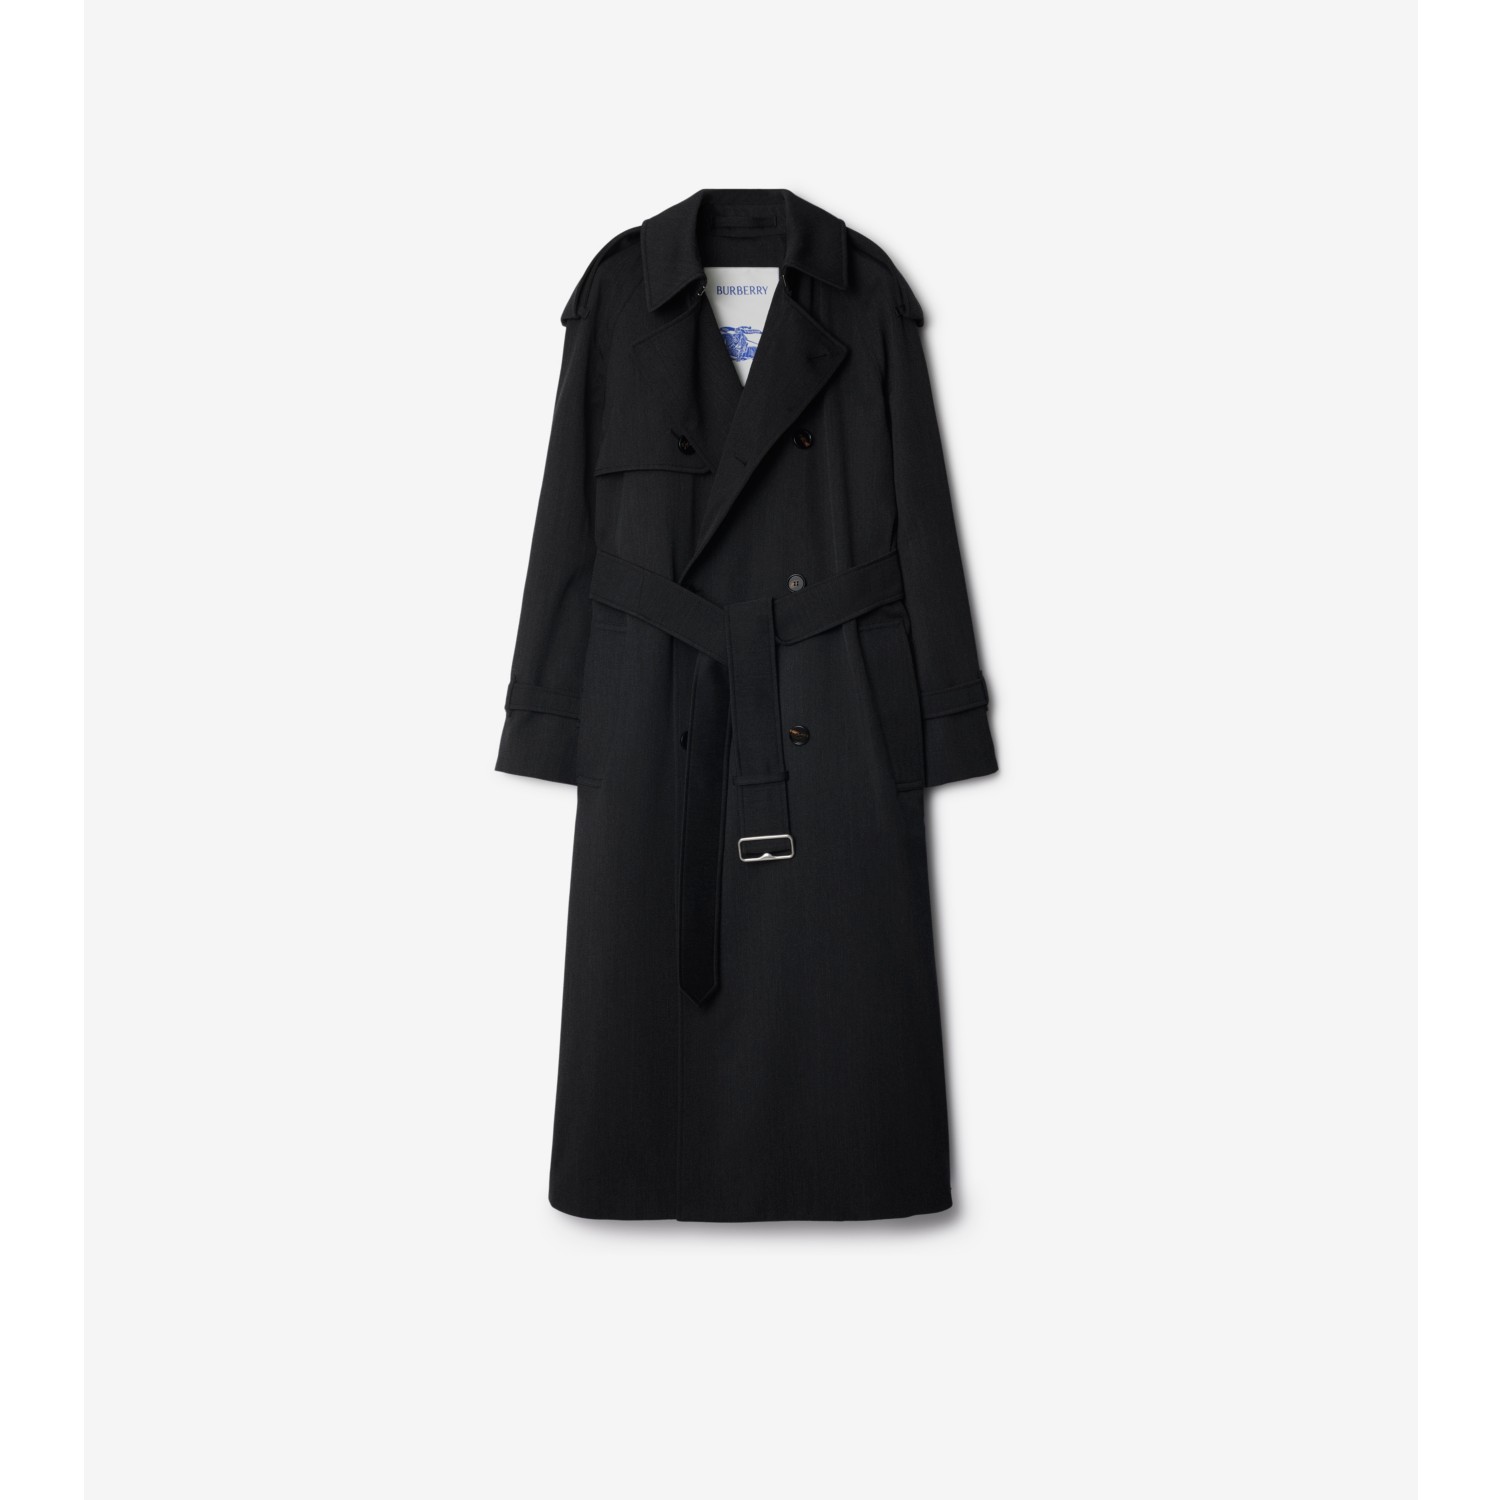 Langer Trenchcoat aus Wolle